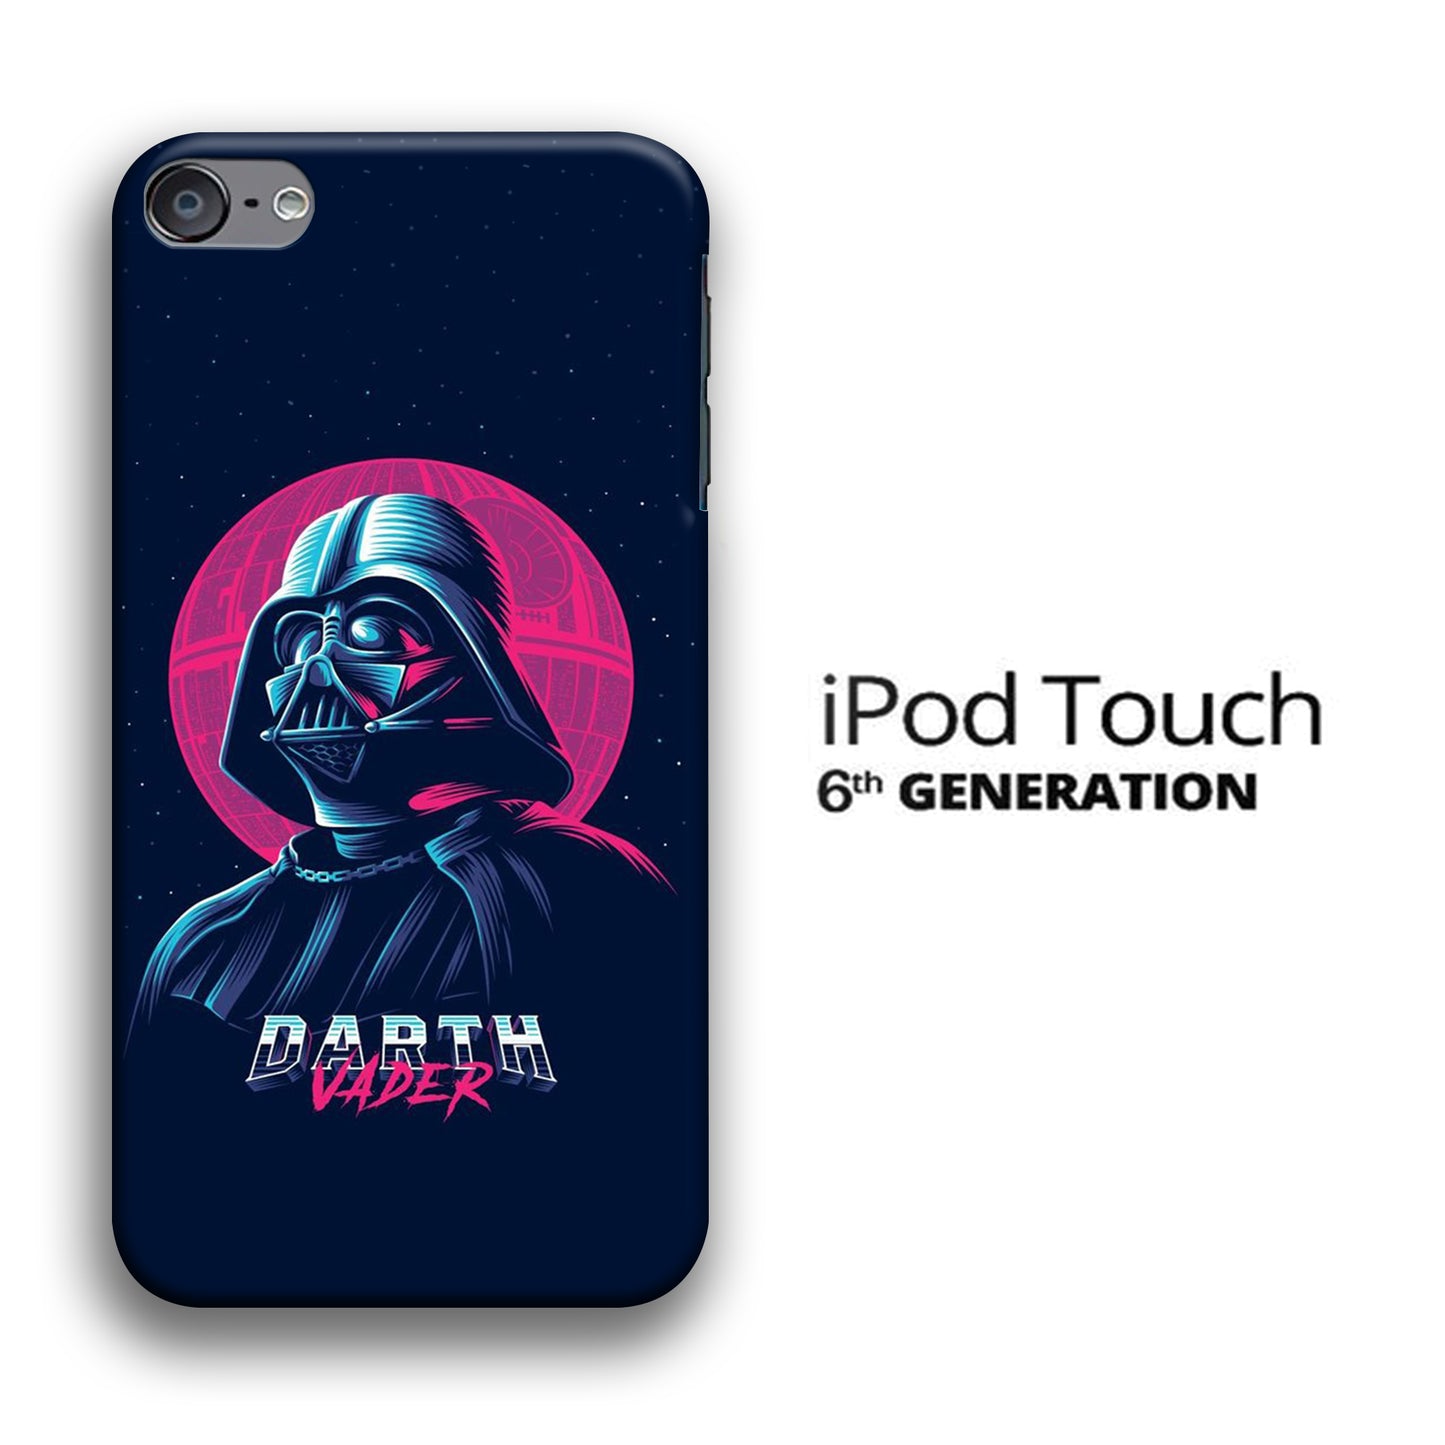 Starwars Darth Vader Silhouette iPod Touch 6 3D Case